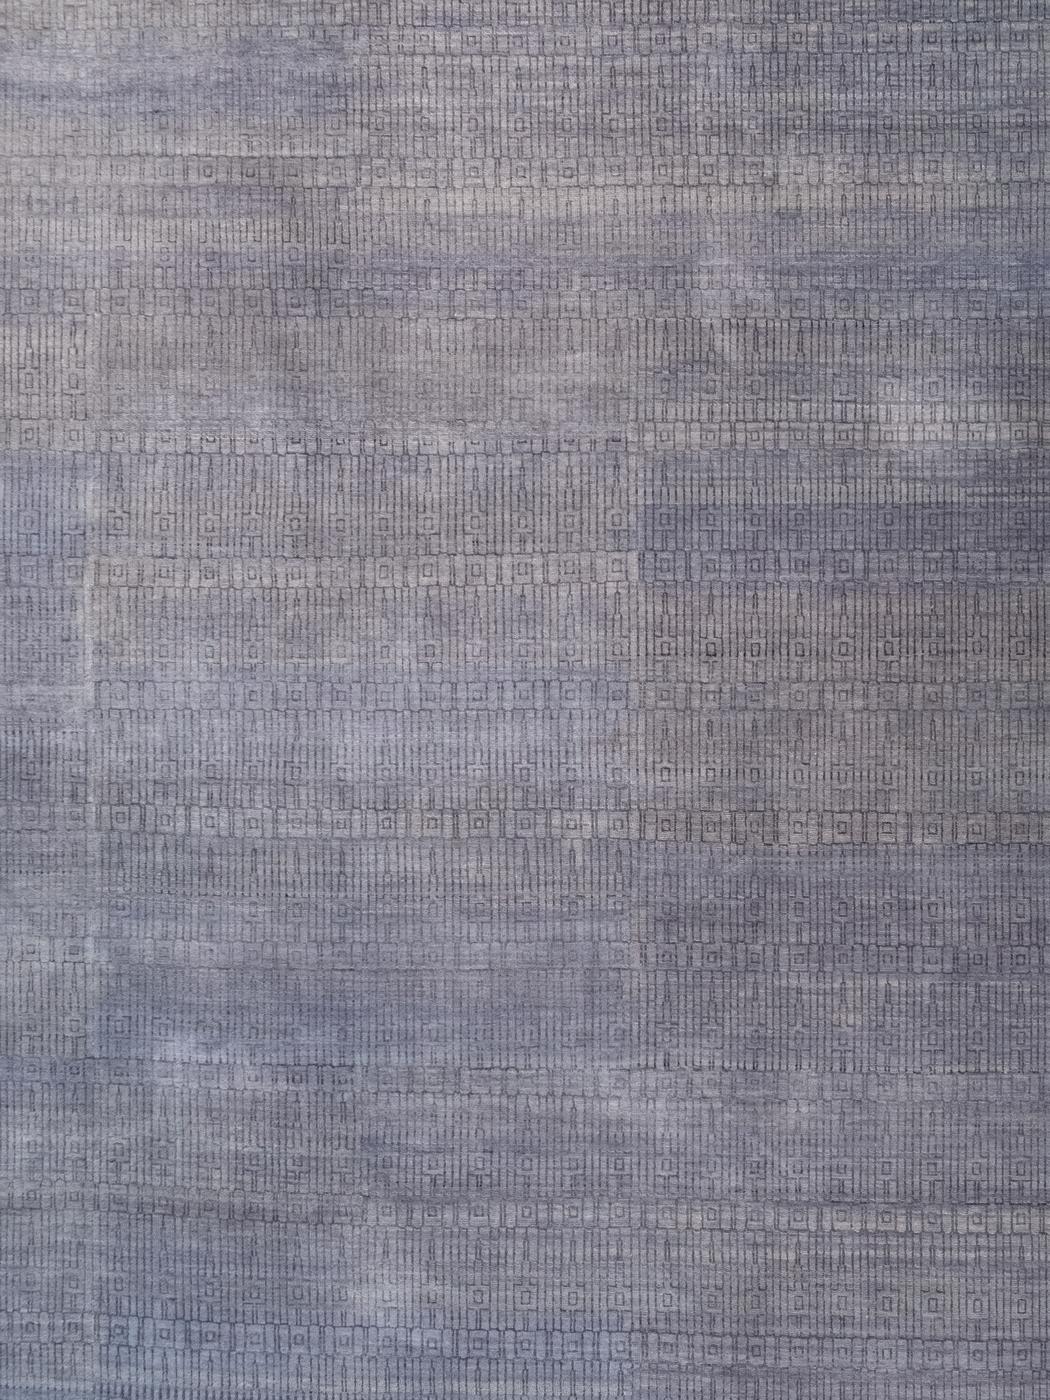 In soft, subtle, and subdued shades of light gray, this minimalist architectural carpet titled Excelsior measures 9’ x 12’ and belongs to the Orley Shabahang Architectural Collection. Hand-knotted in Orley Shabahang’s Persian-inspired Amritsar